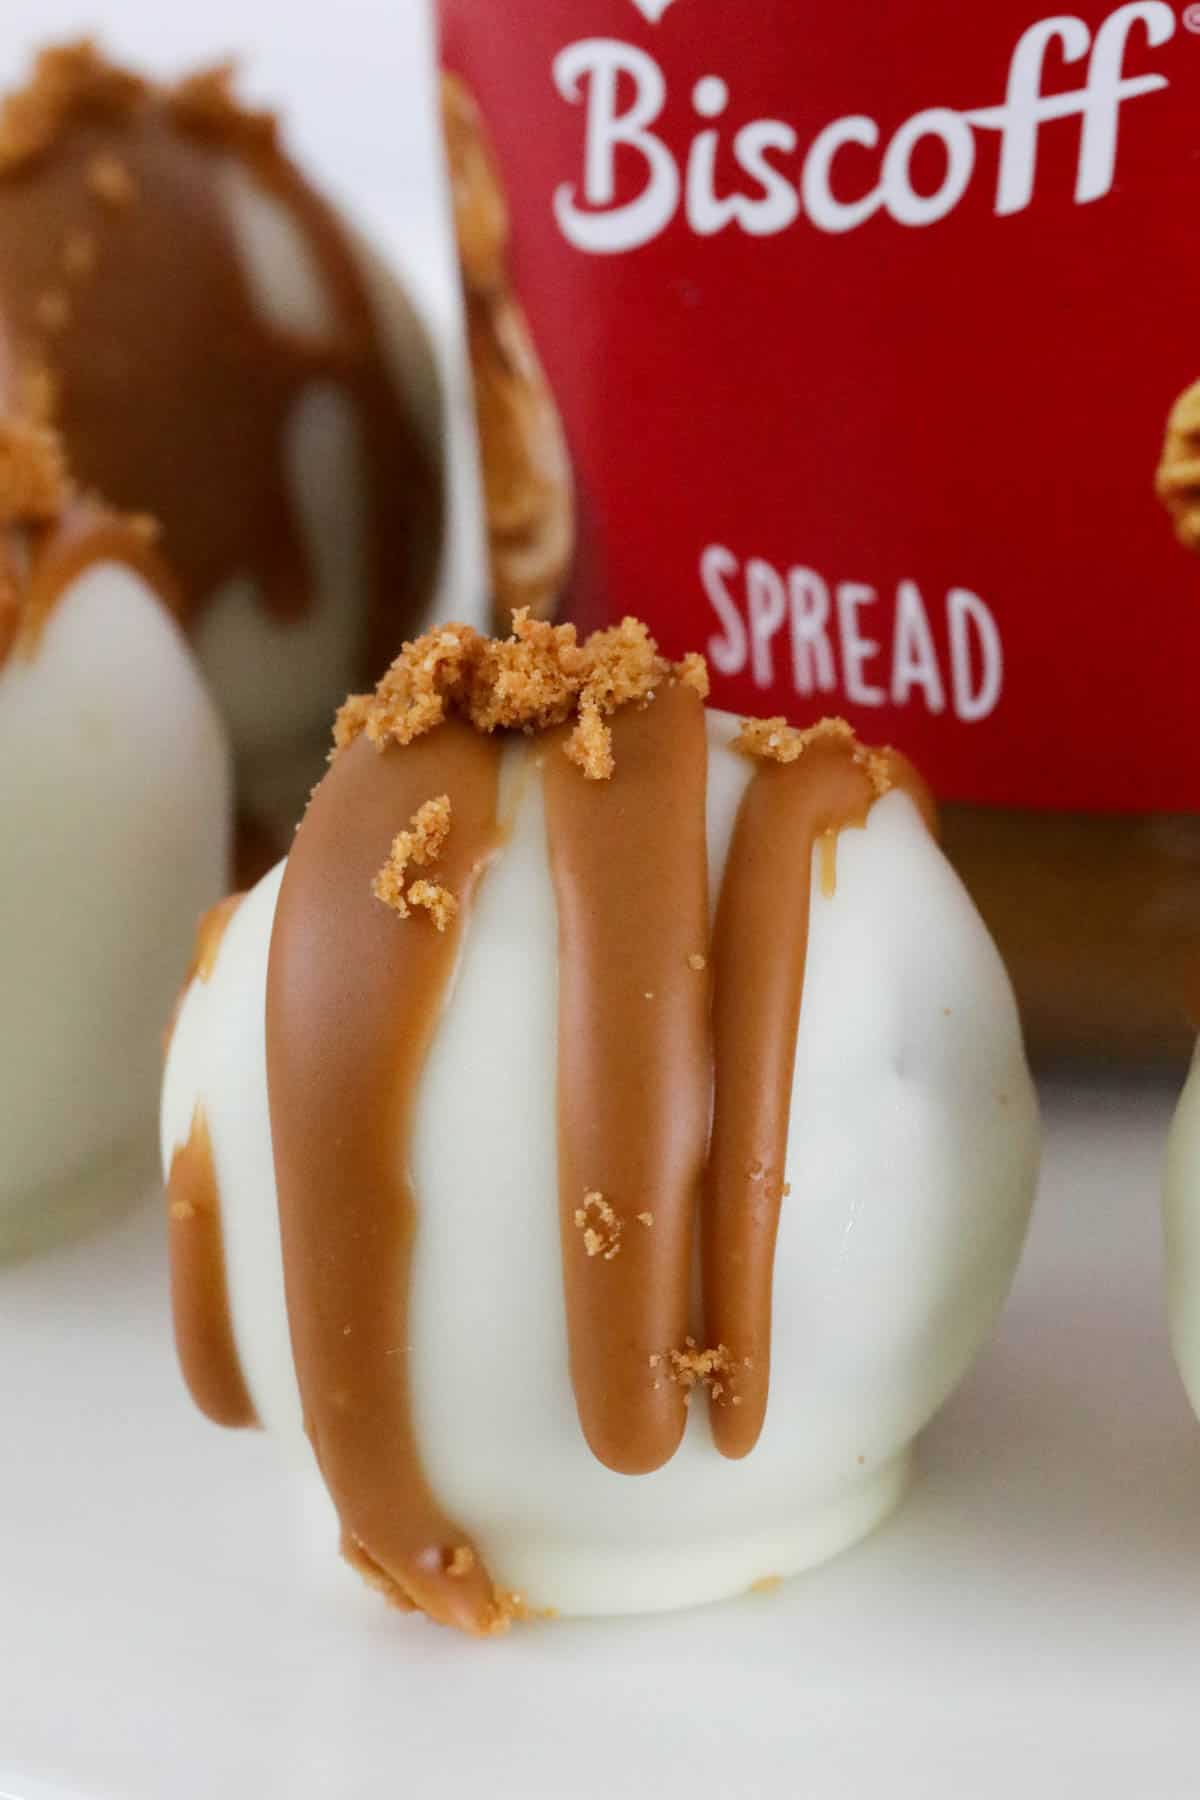 Close up of Biscoff truffle in front of a jar of Lotus Biscoff spread.